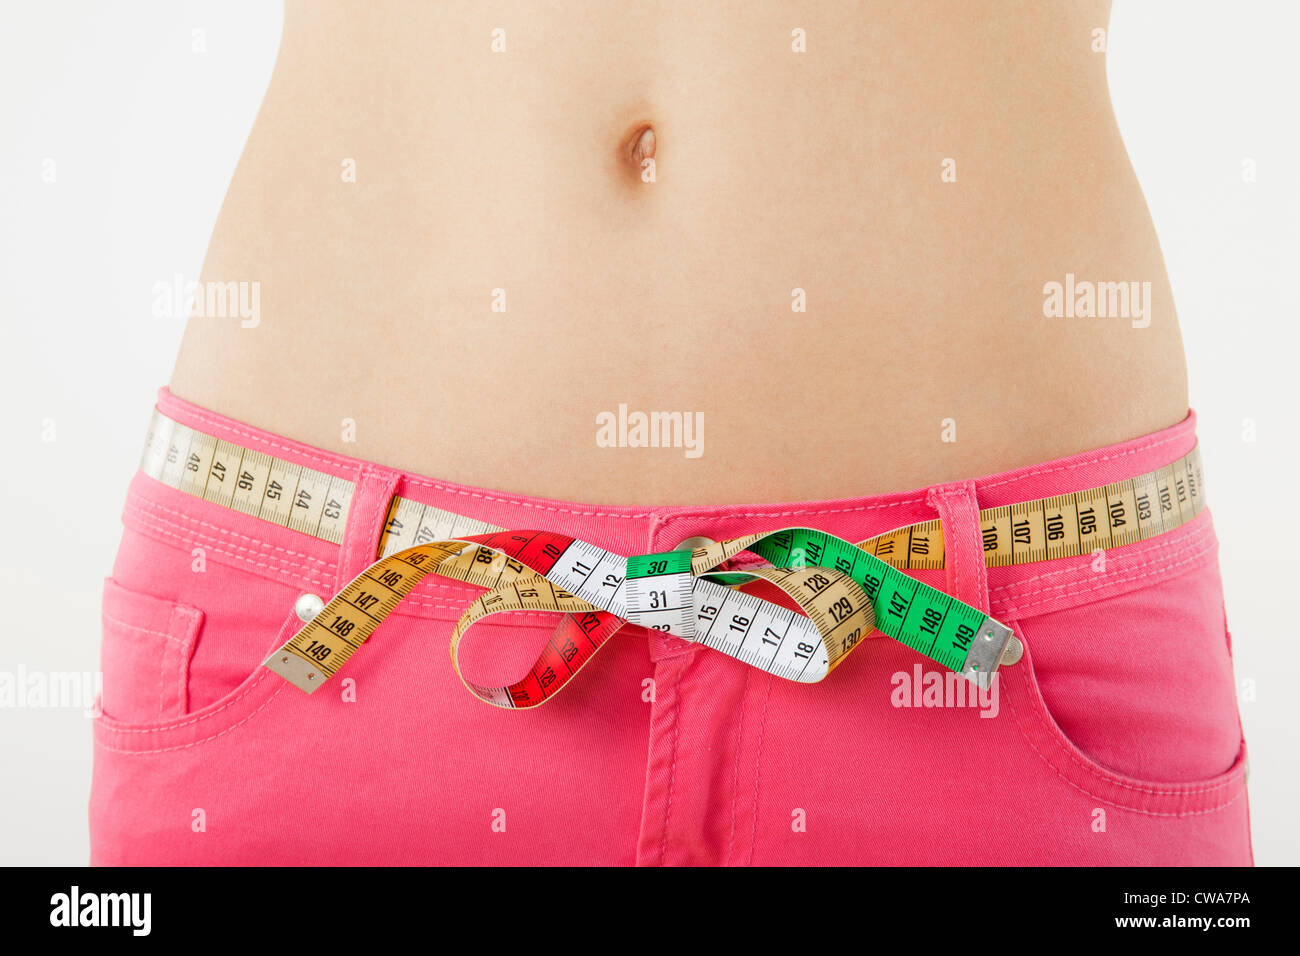 Young woman measuring waist with tape measure Stock Photo